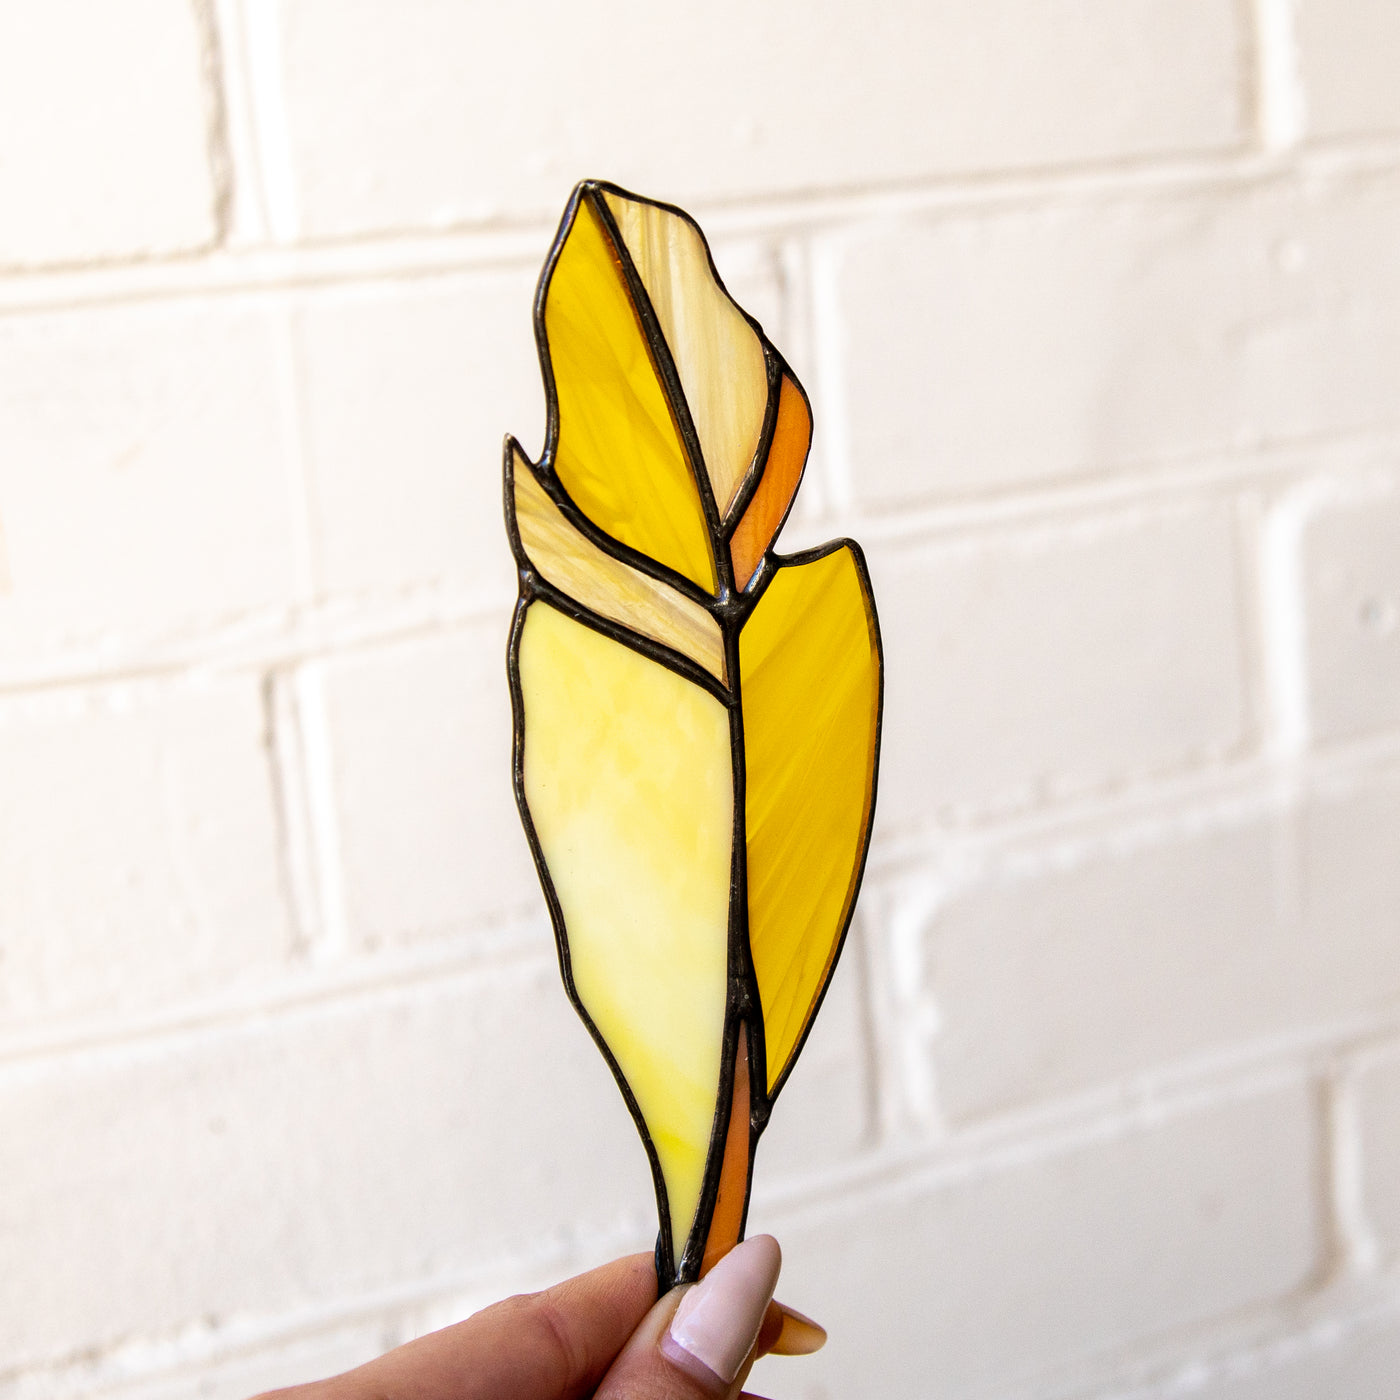 Stained glass feather suncatcher of yellow color with whity and orange parts